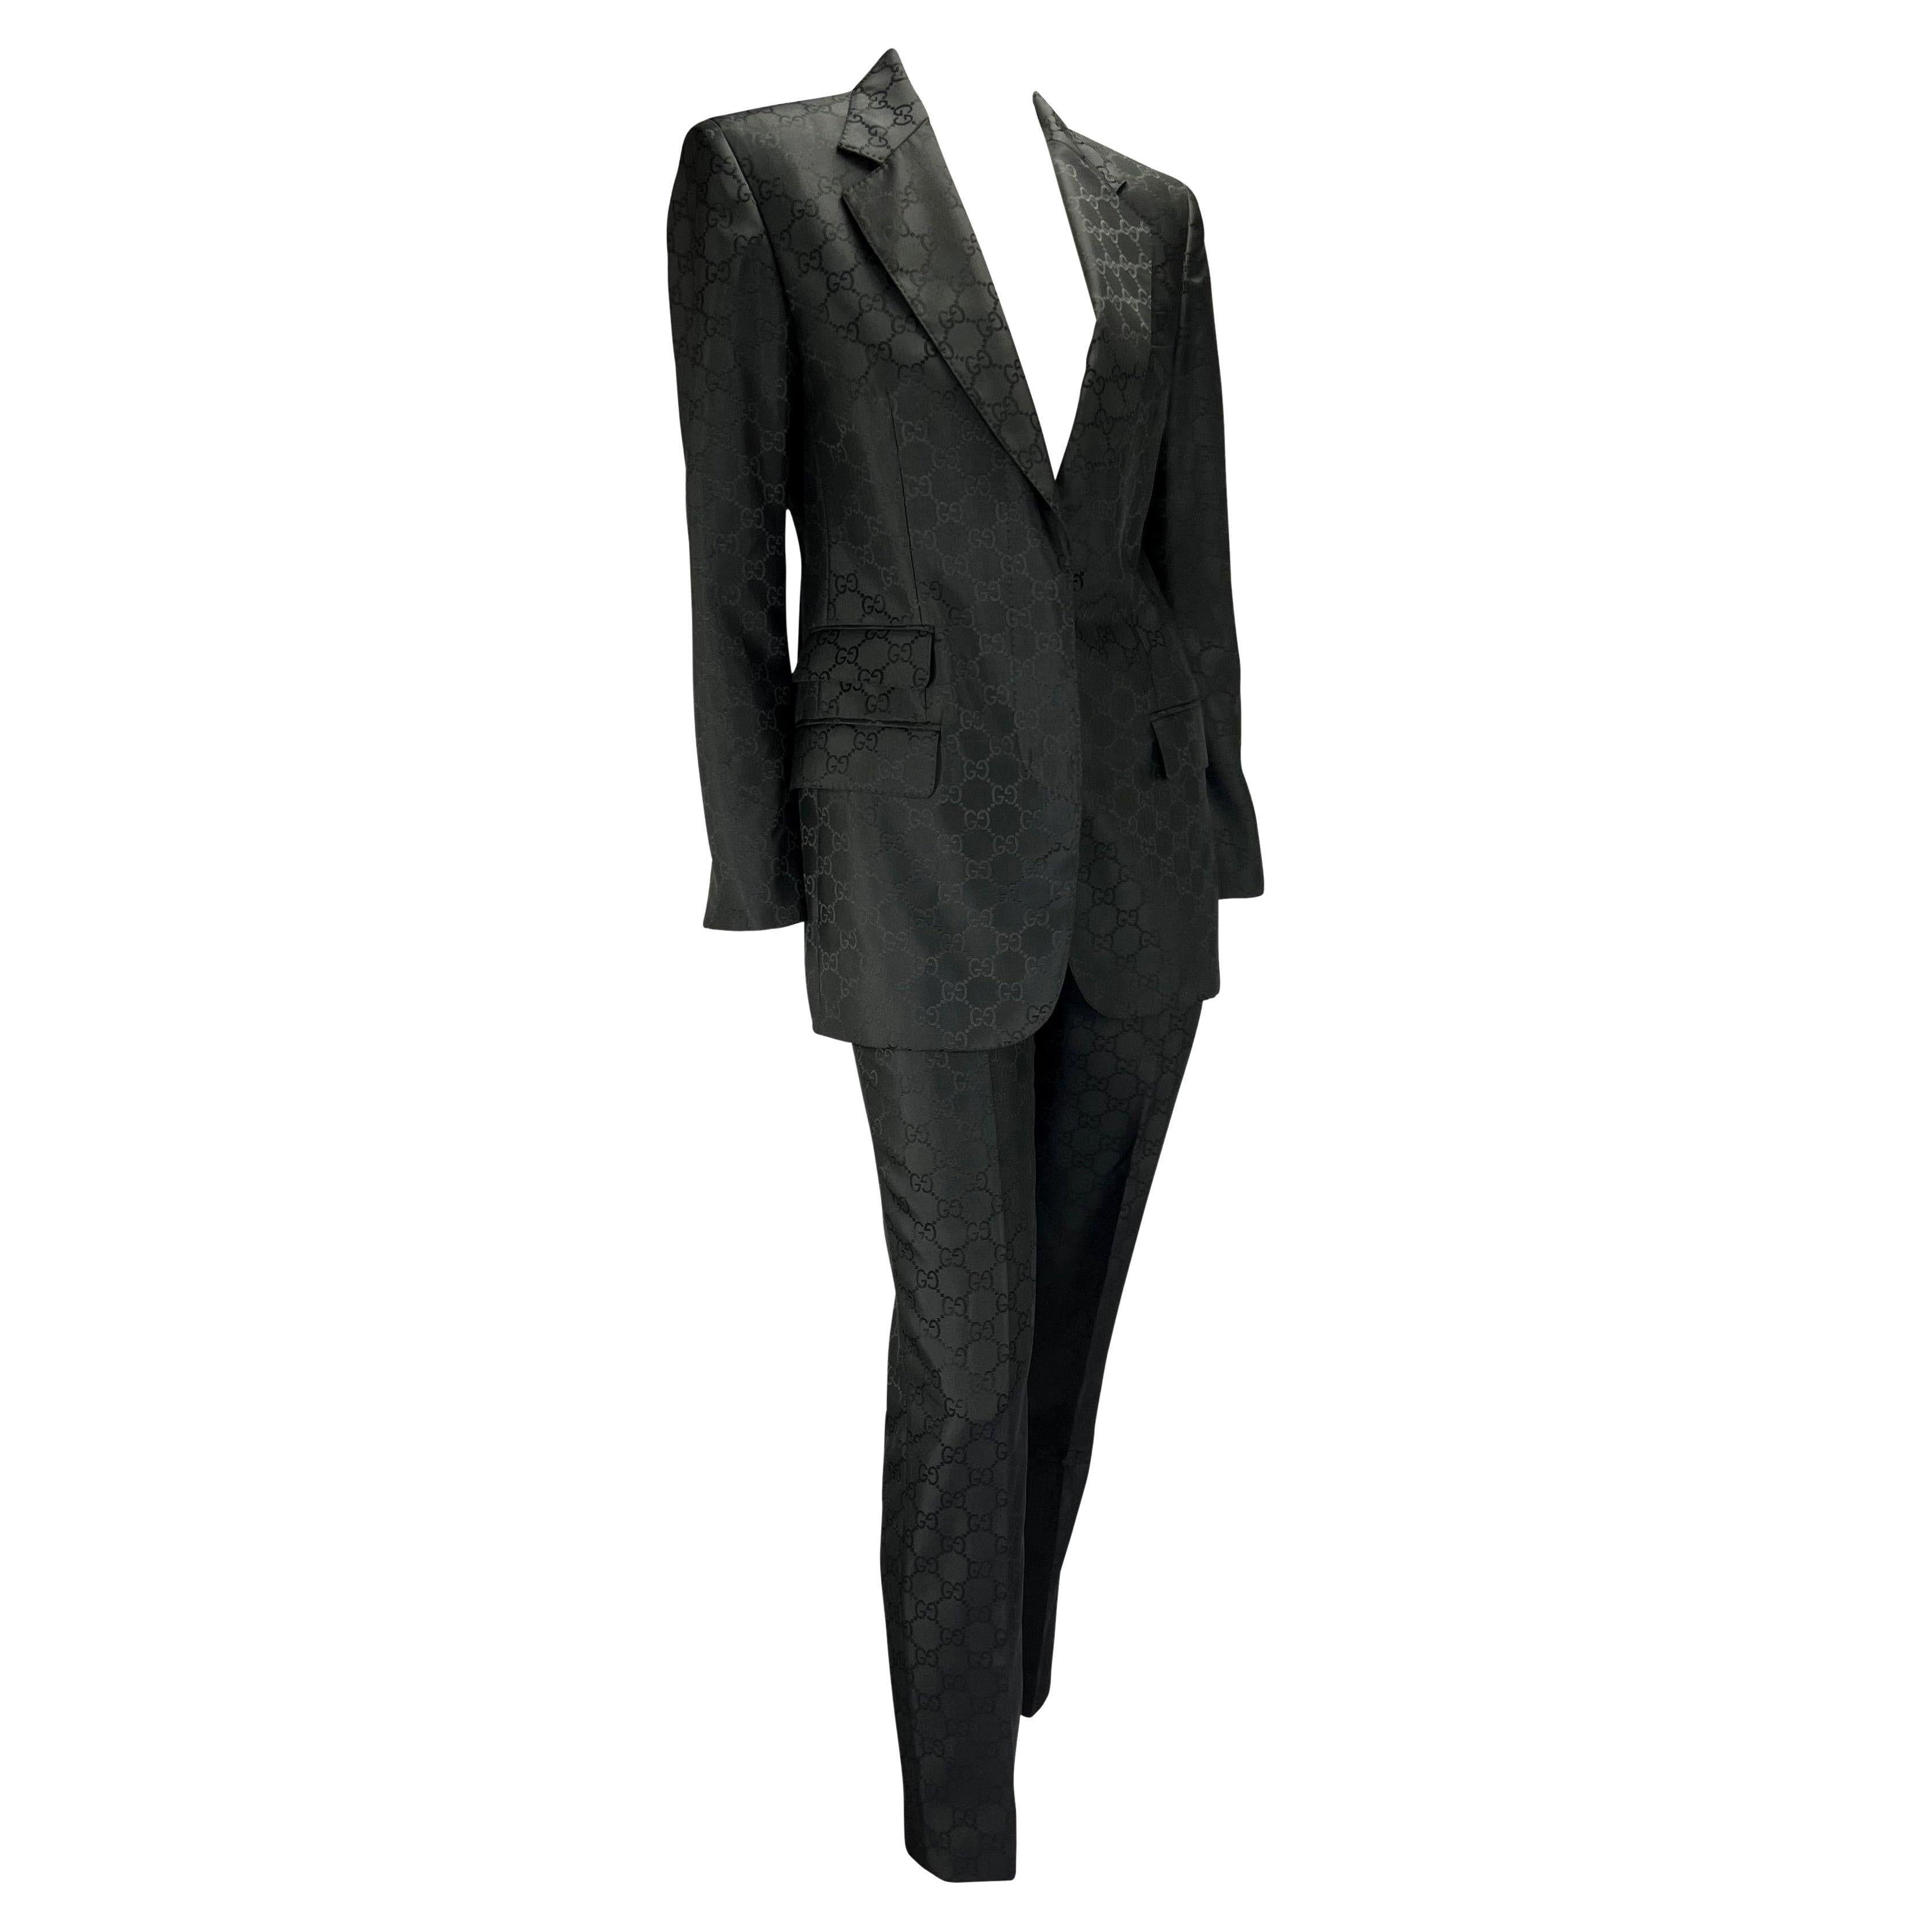 Women's S/S 1998 Gucci by Tom Ford Runway GG Monogram Satin Black Pantsuit For Sale